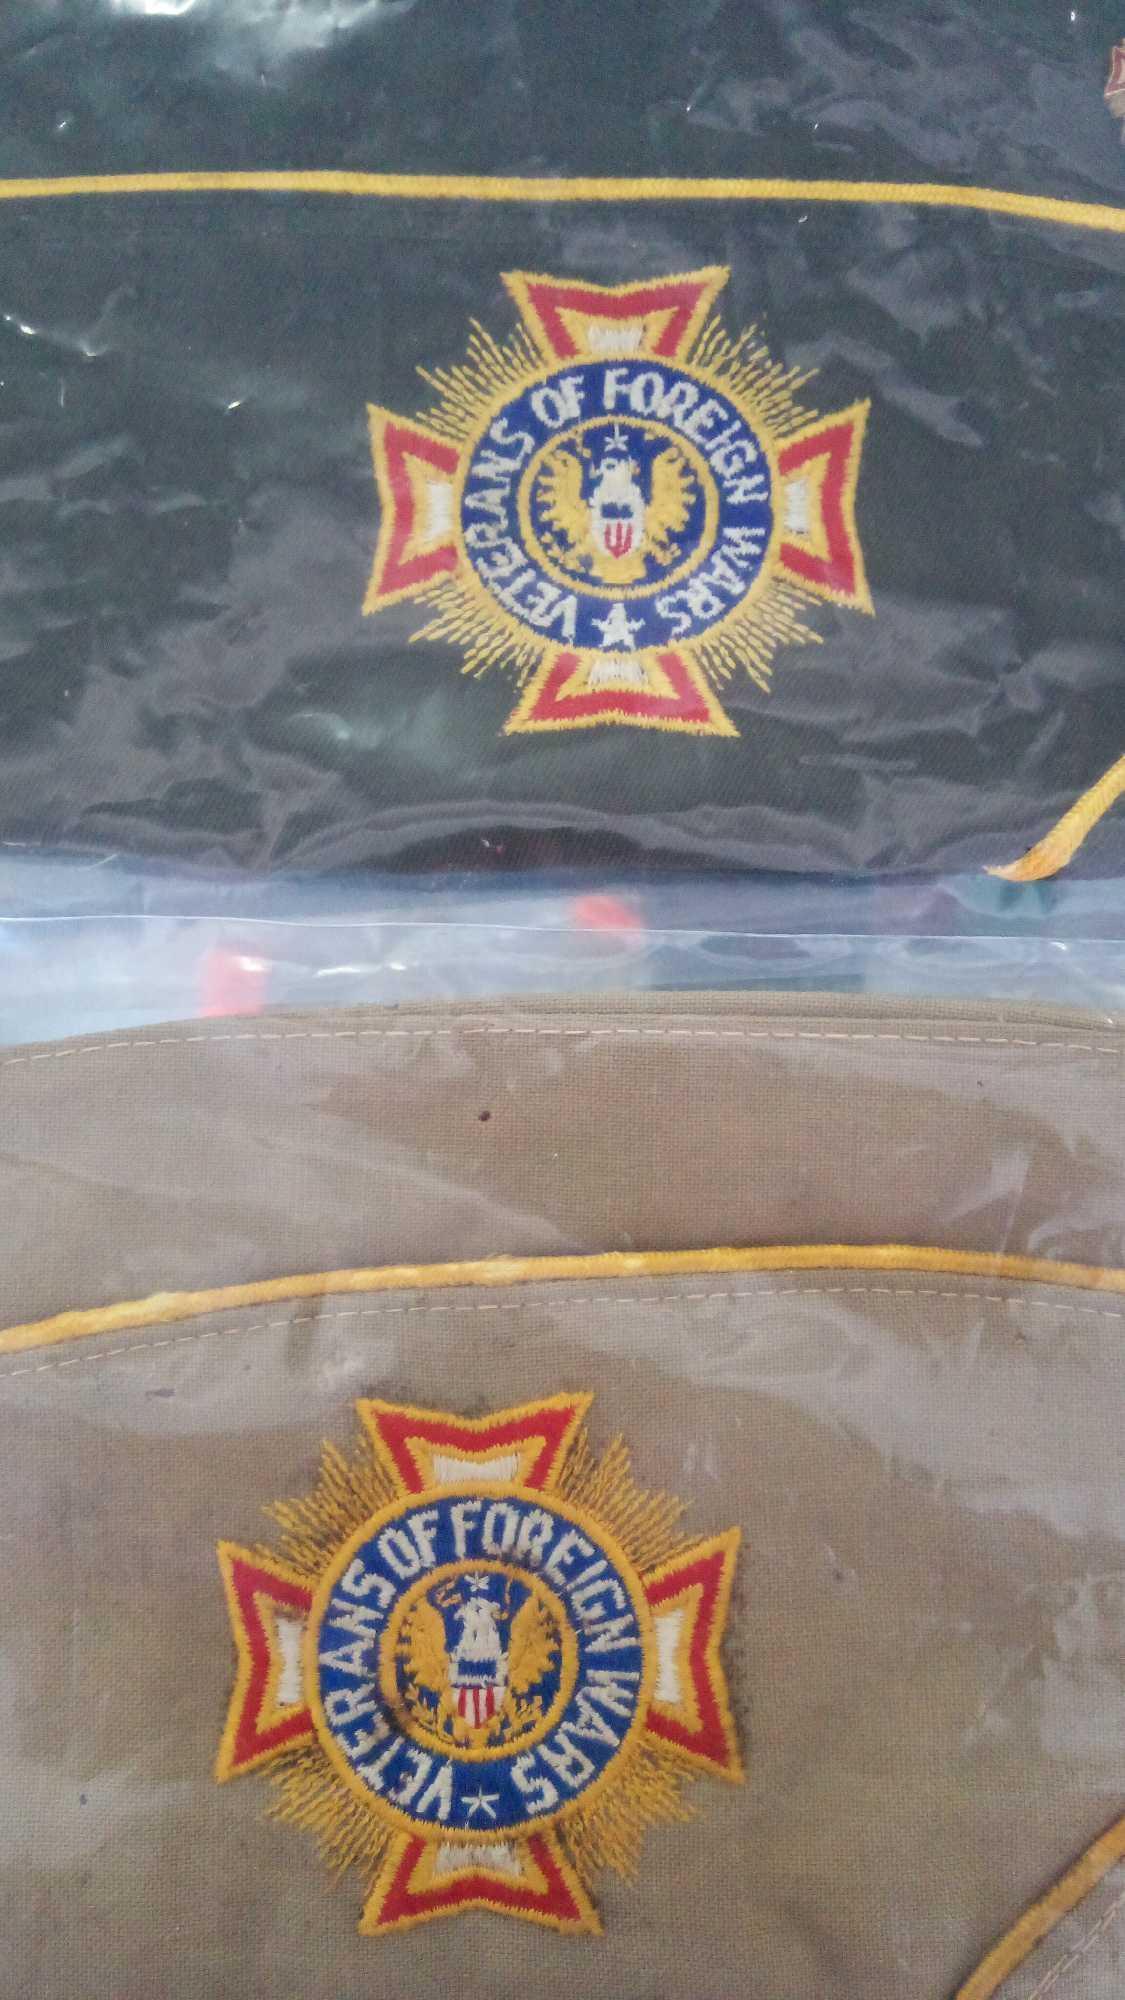 (2) FLORIDA VFW VETERANS OF FOREIGN WARS CAPS